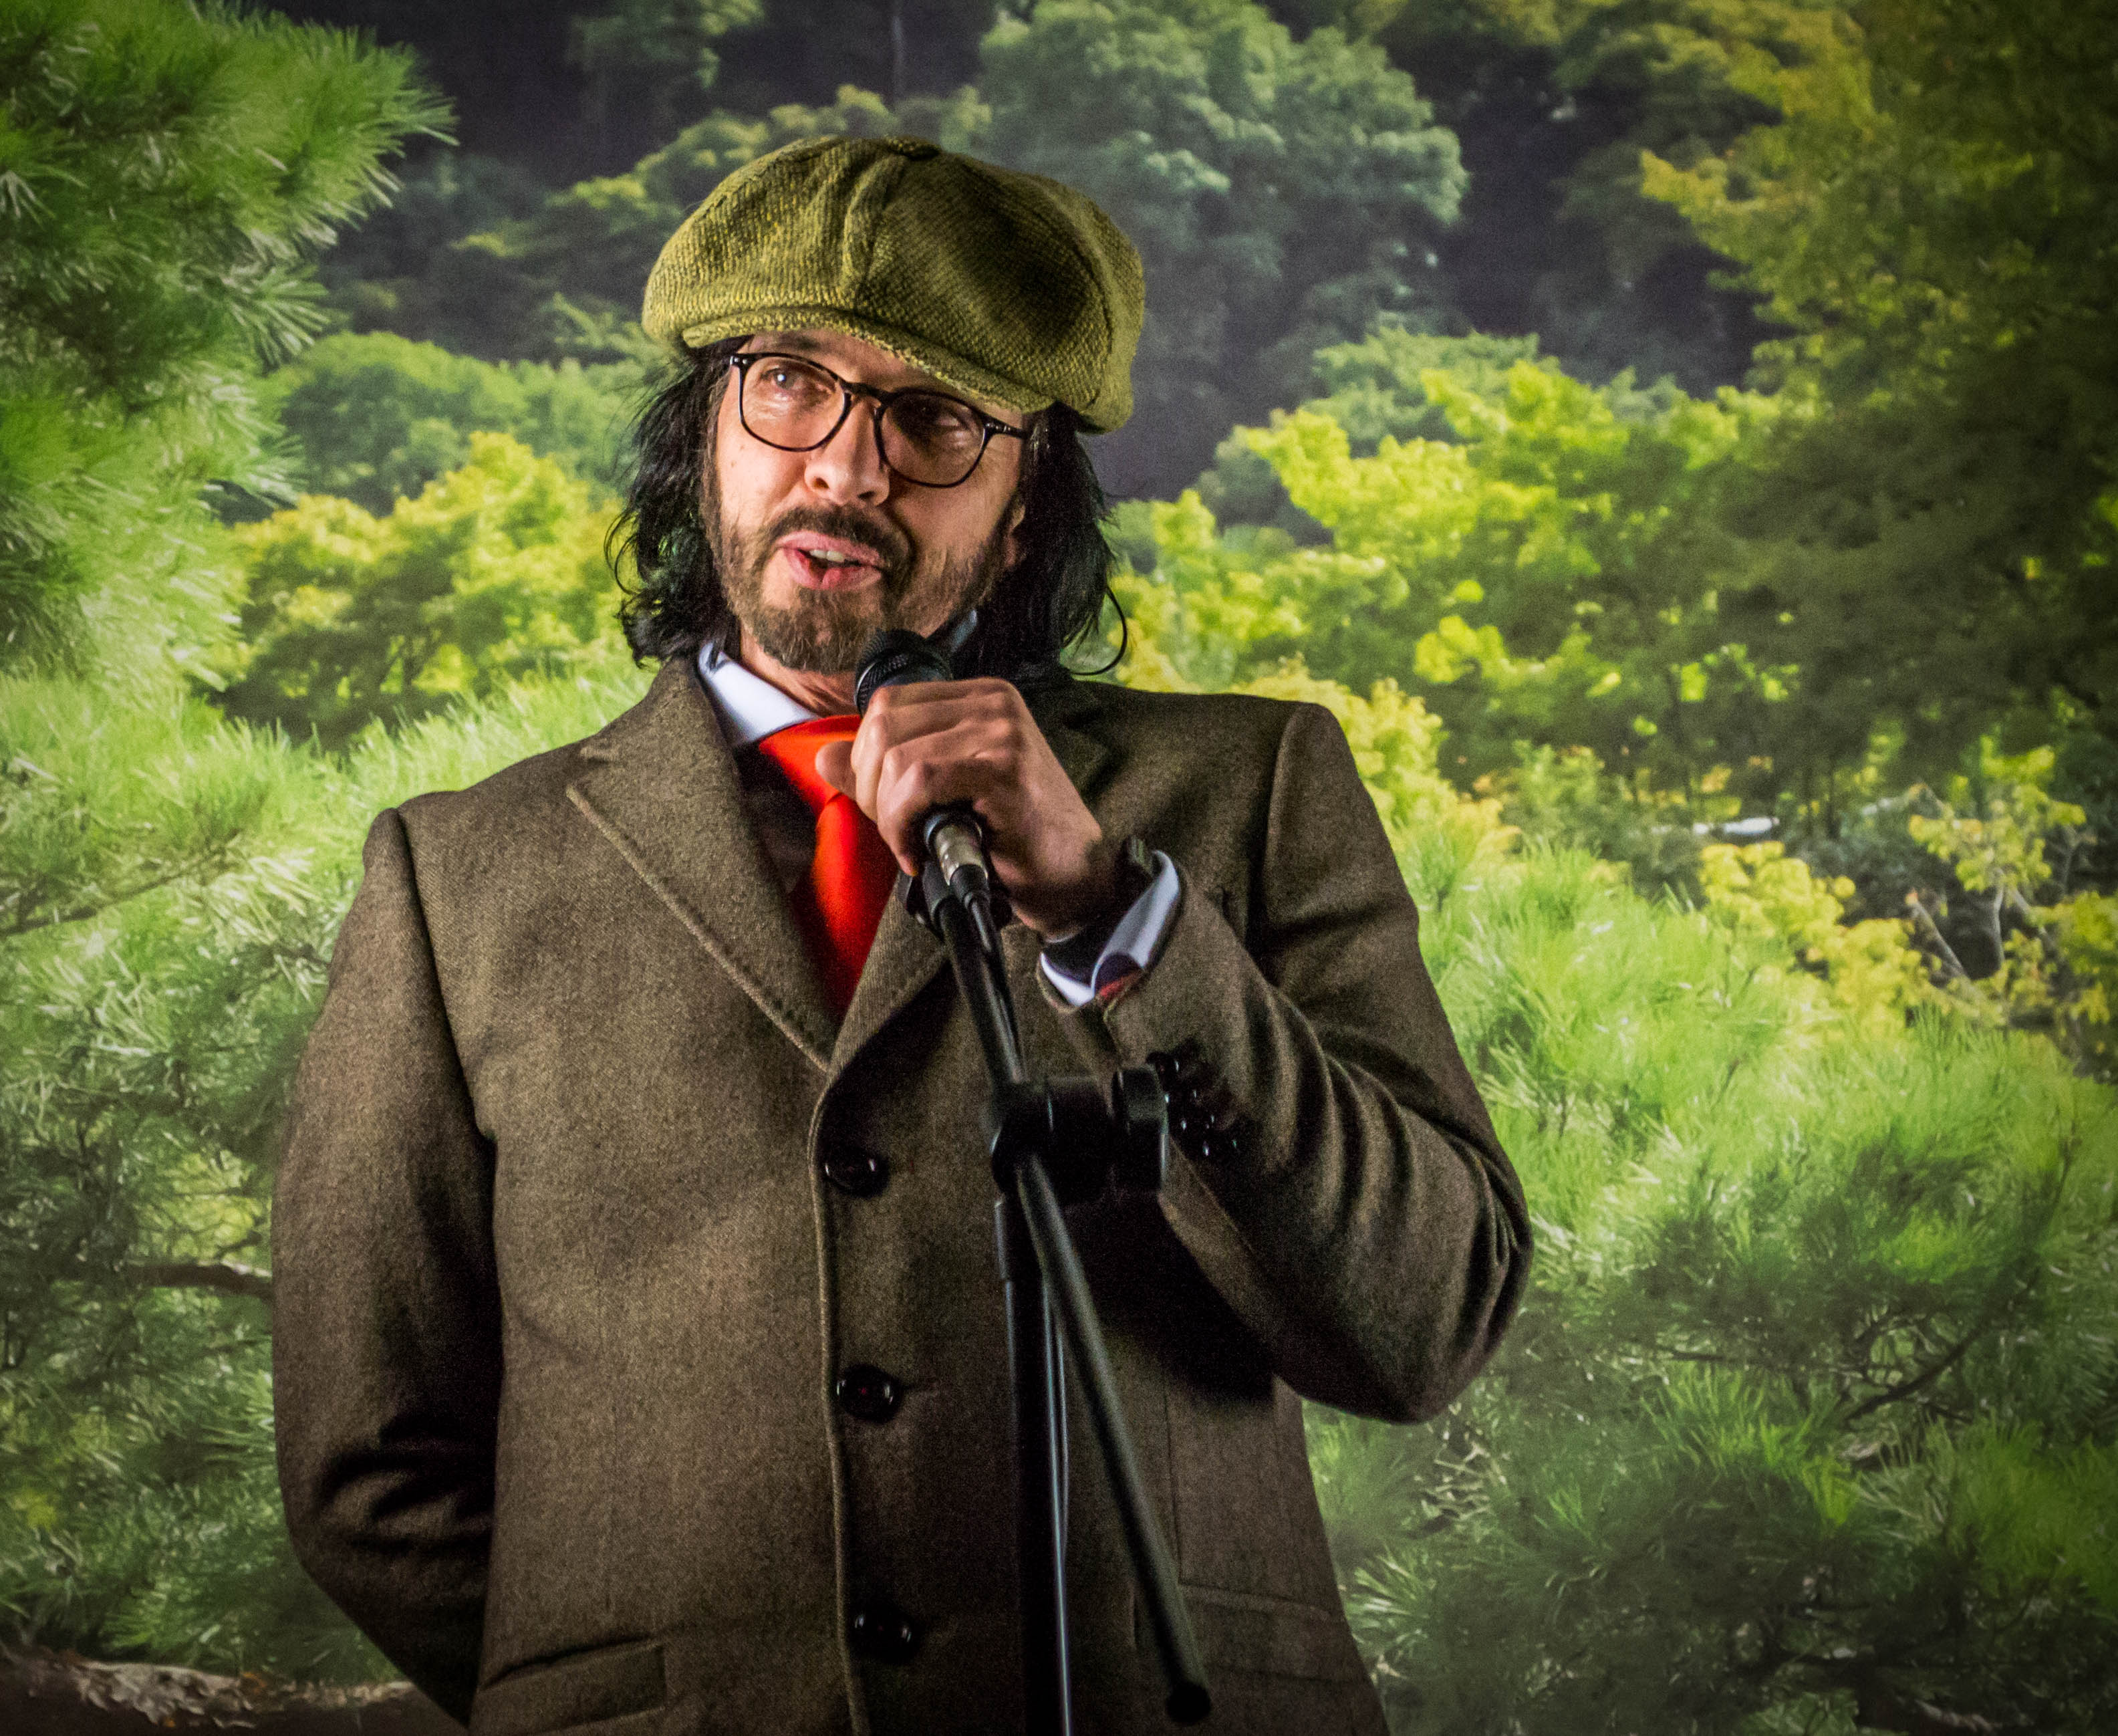 Man in flat cap and smart jacket stood in front of a microphone in front of trees.